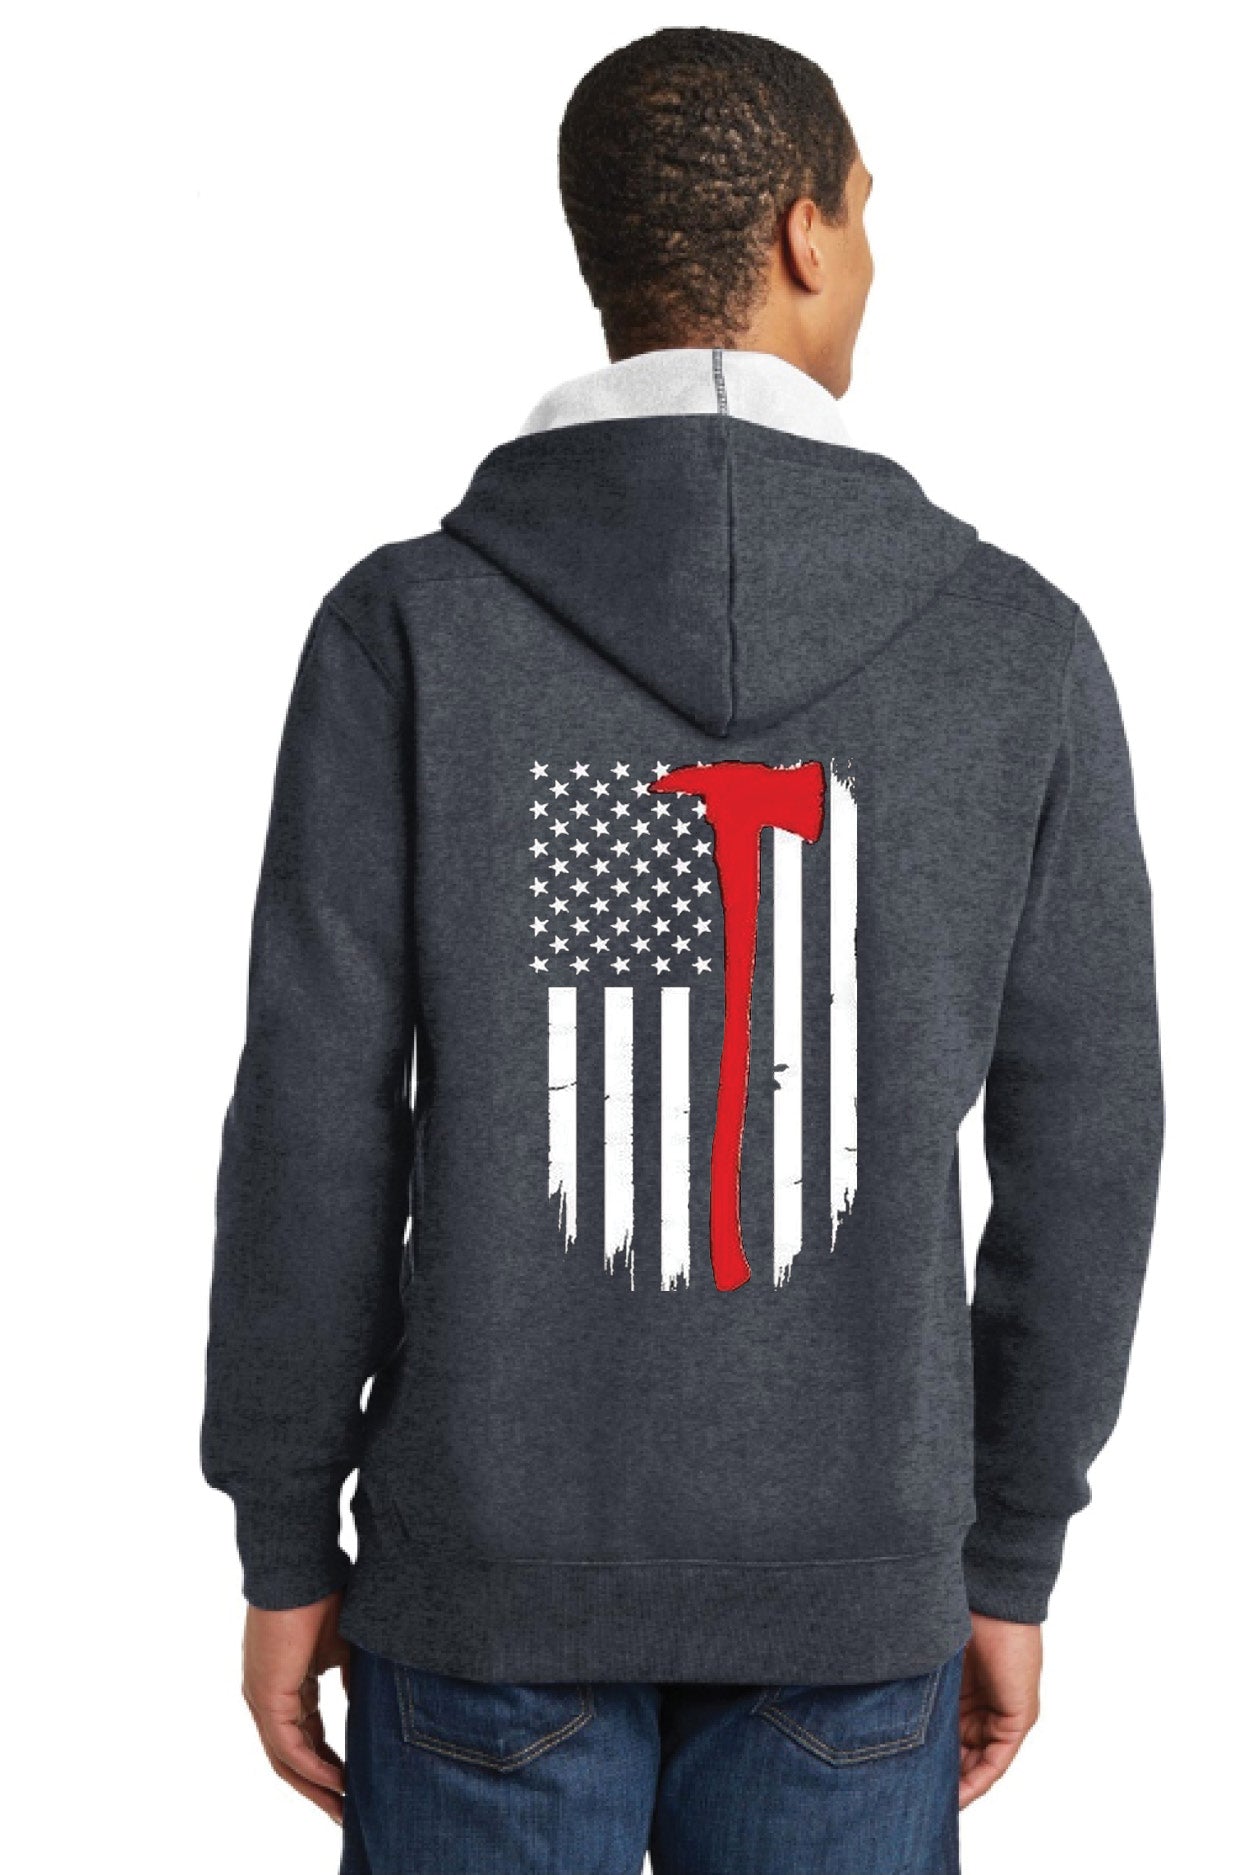 Lace Up Pullover Hooded Sweatshirt with Full Back Halligan Flag